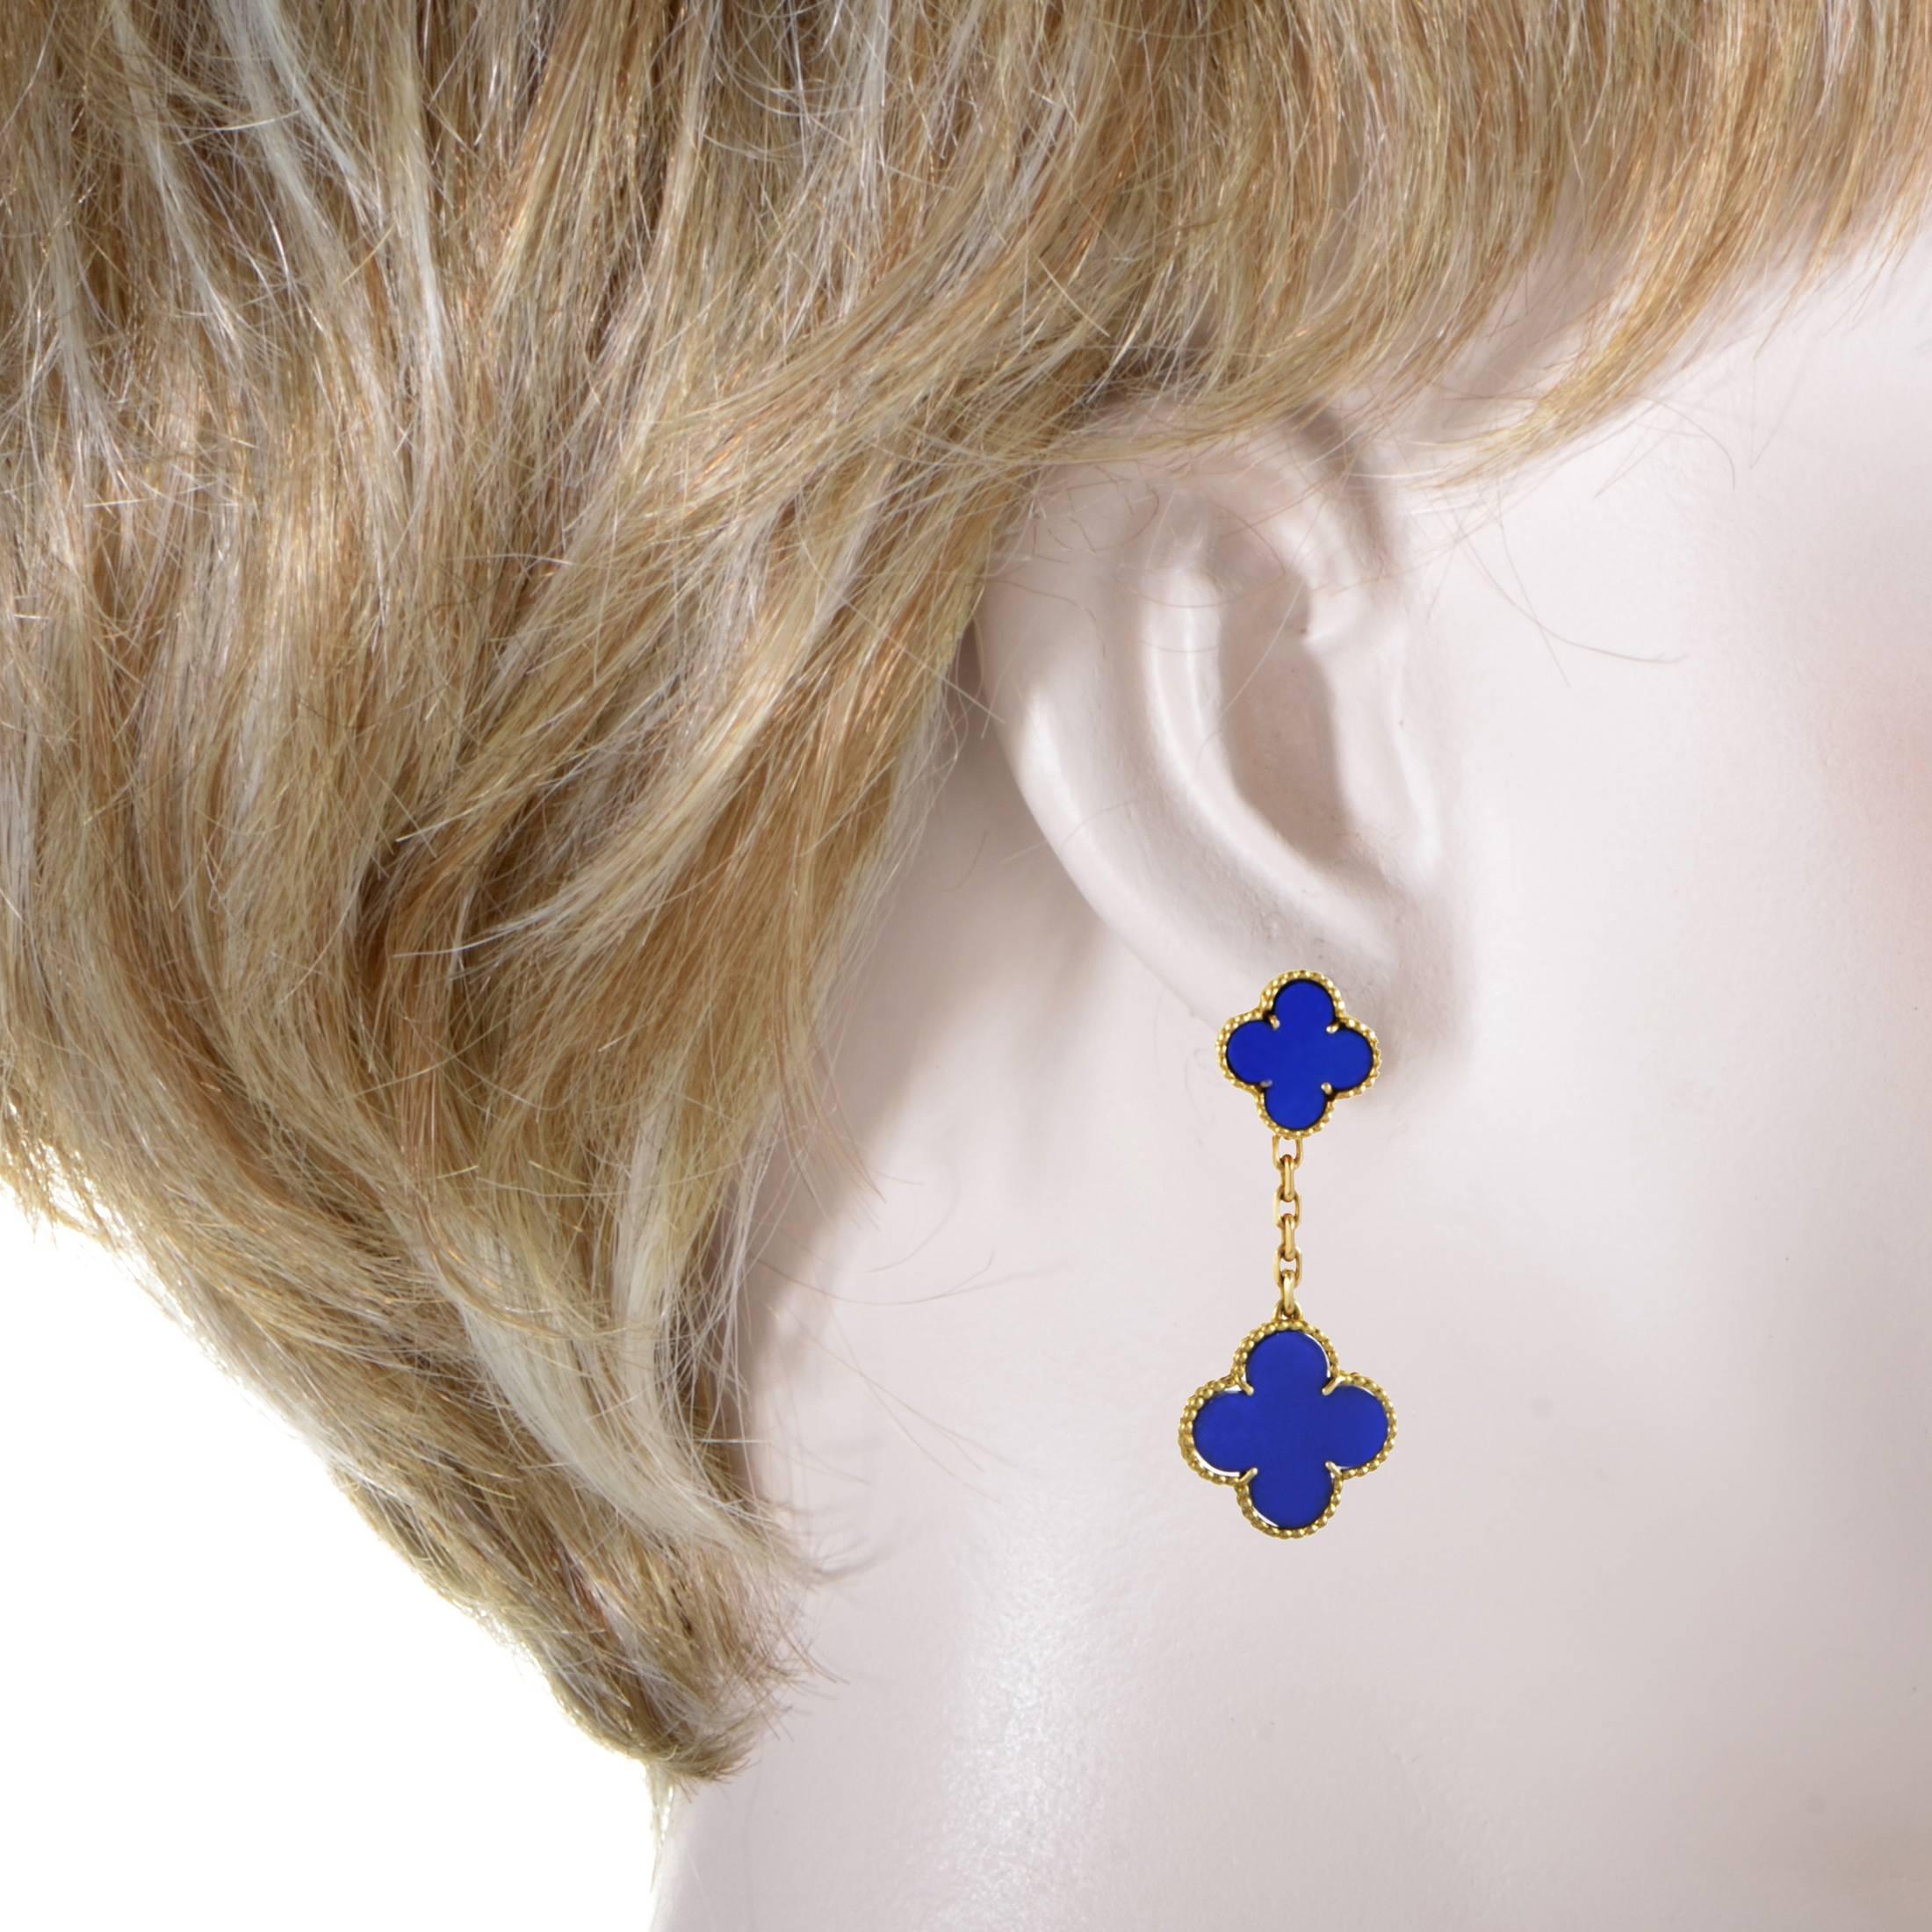 Boasting charming shapes of intricately ornamented 18K yellow gold with stunningly contrasting lapis lazuli stones of magnificent color, these extremely rare earrings from Van Cleef & Arpels are true jewels from the esteemed Alhambra